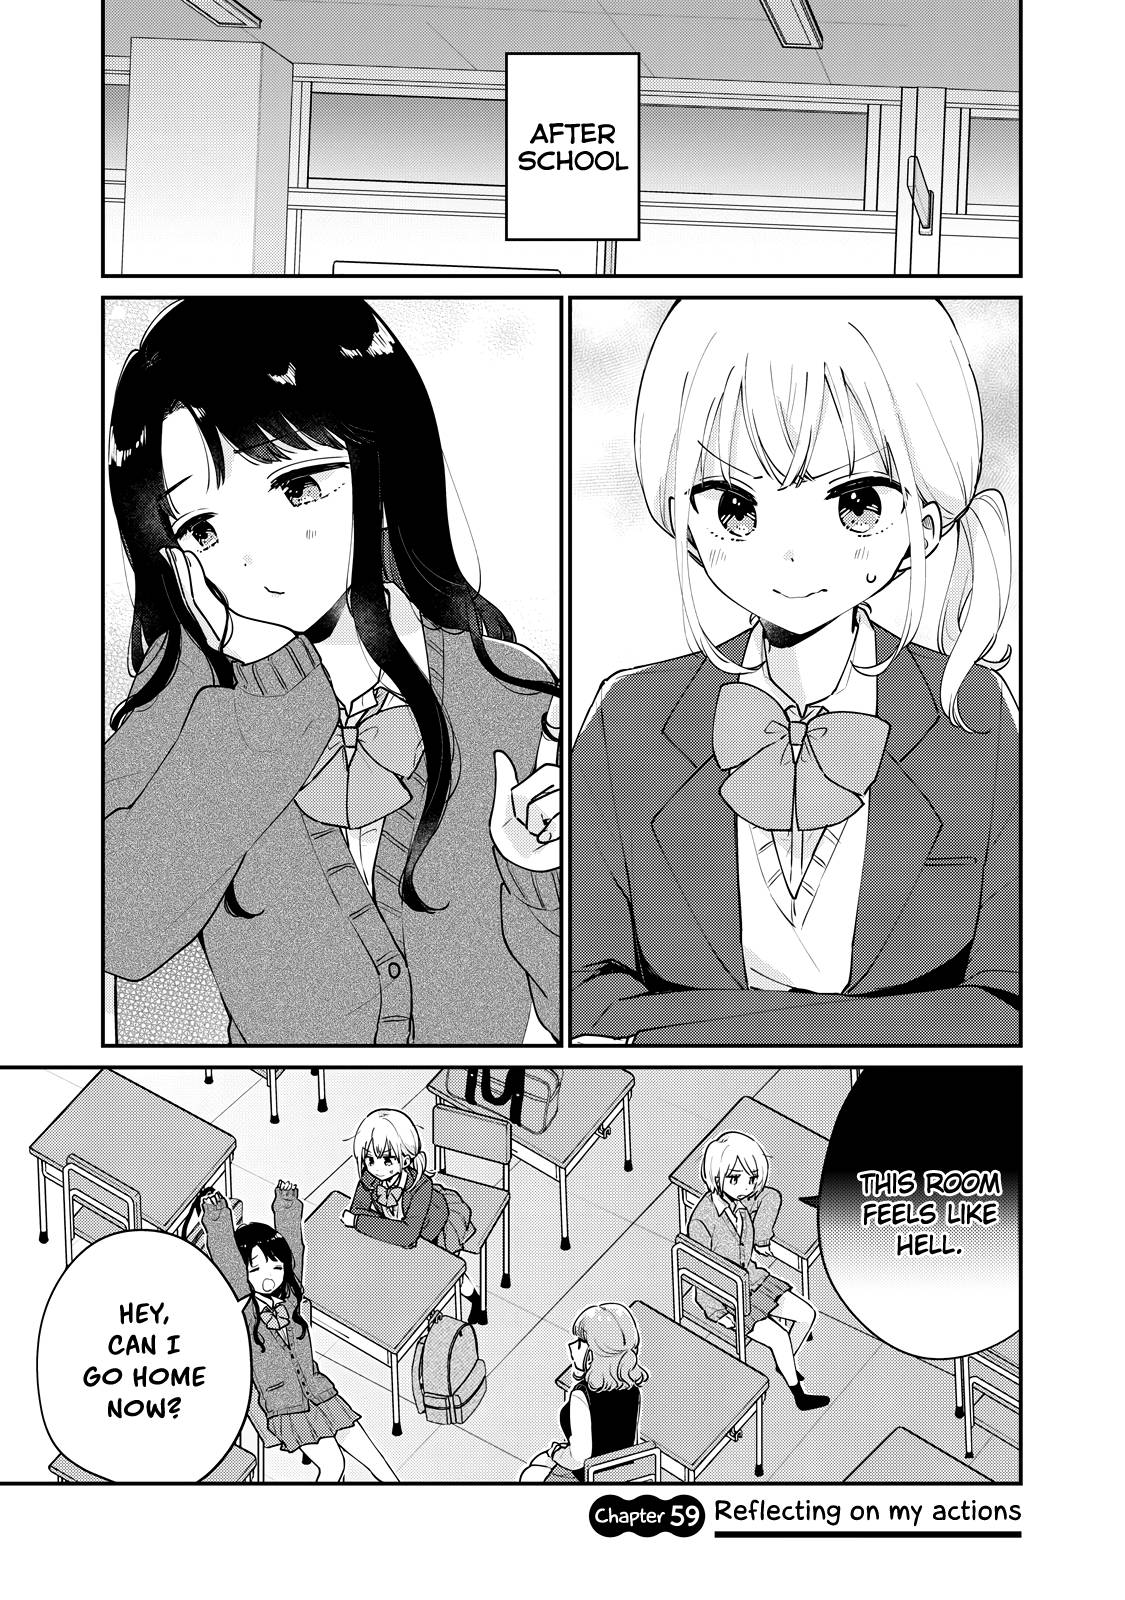 It's Not Meguro-san's First Time - chapter 59 - #2